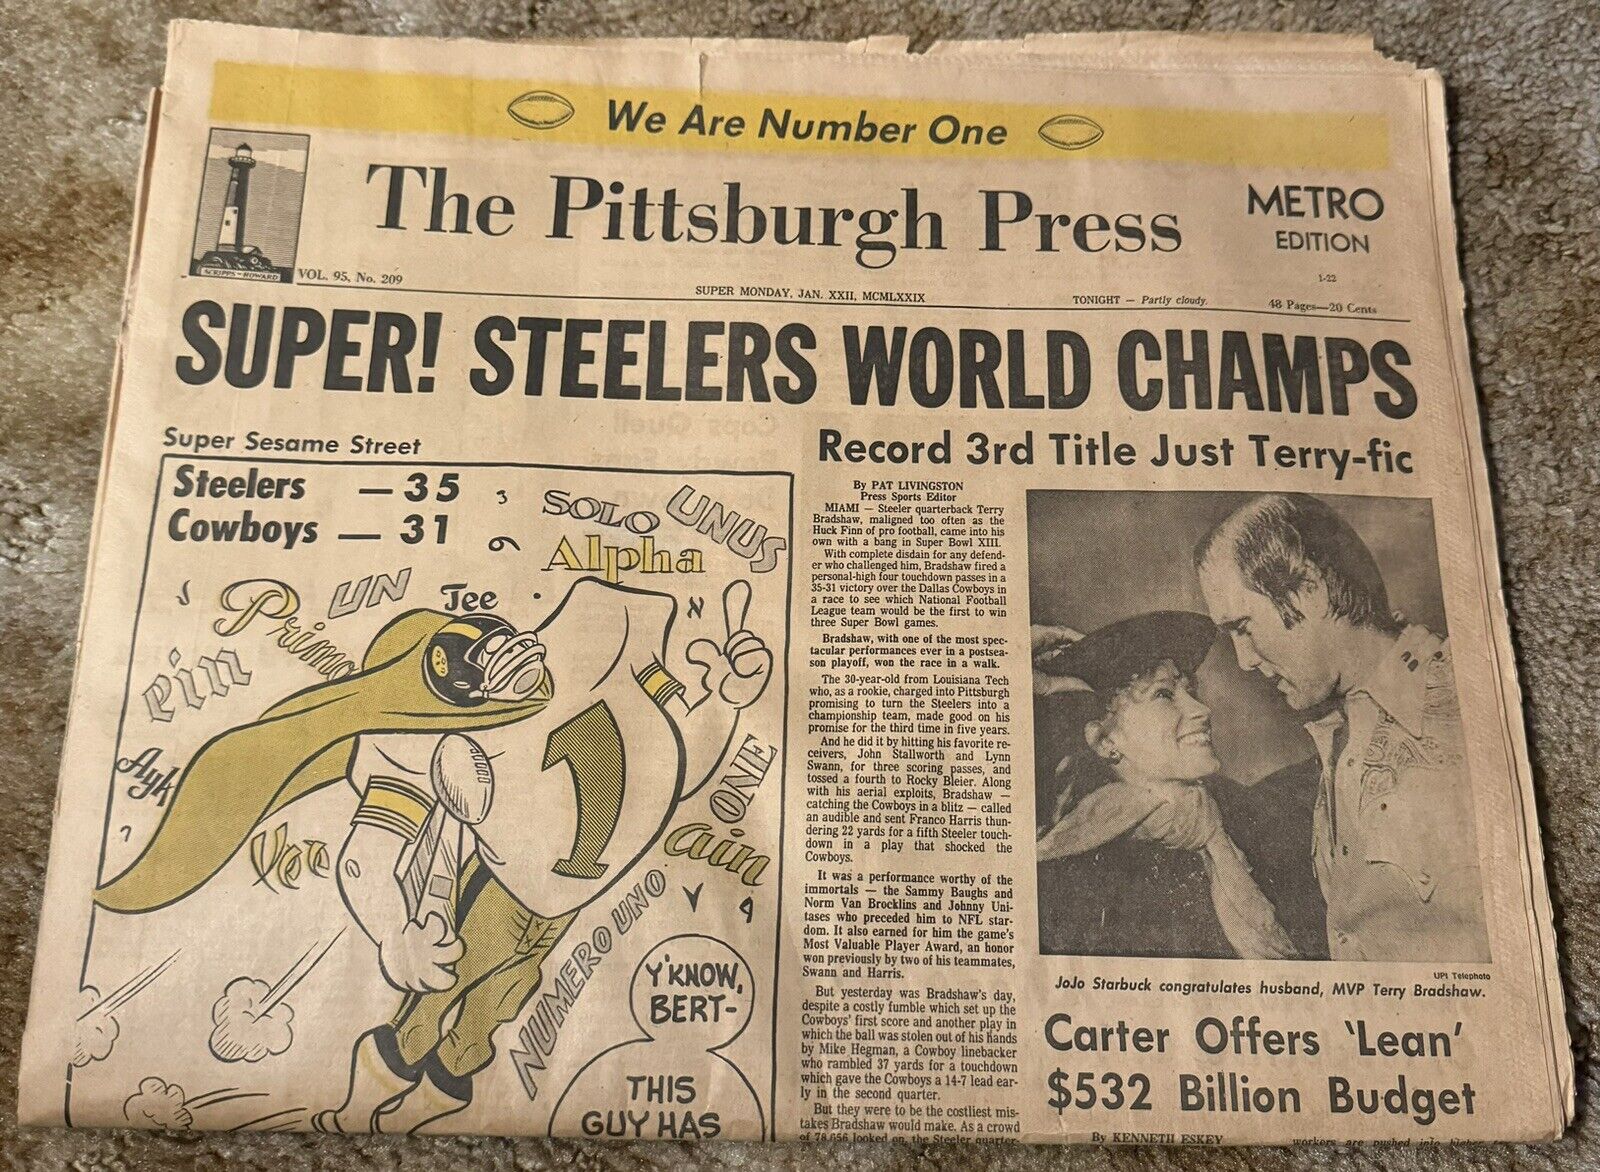 1979 Pittsburgh Press Steelers Super Bowl XIII Victory Full paper METRO Edition